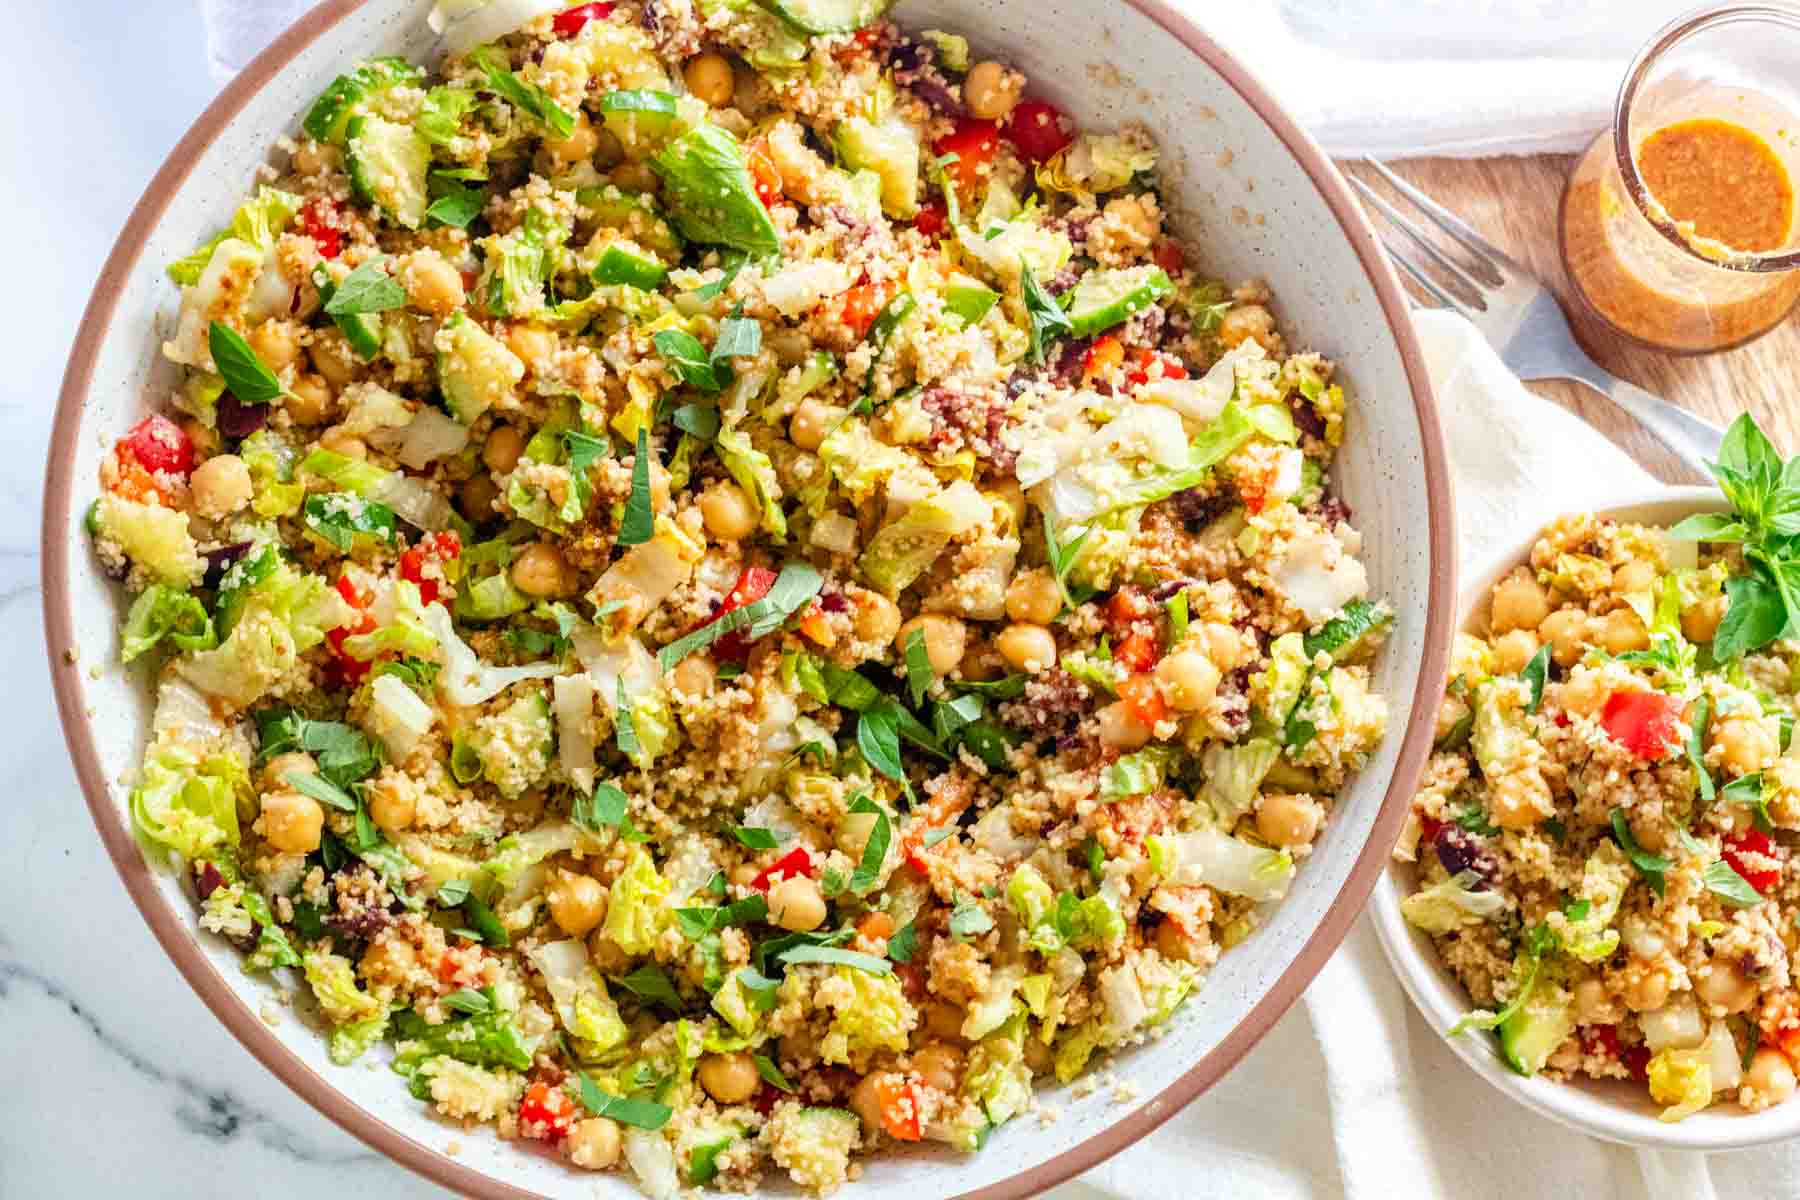 Couscous salad with vegetables and chickpeas in a large serving bowl.